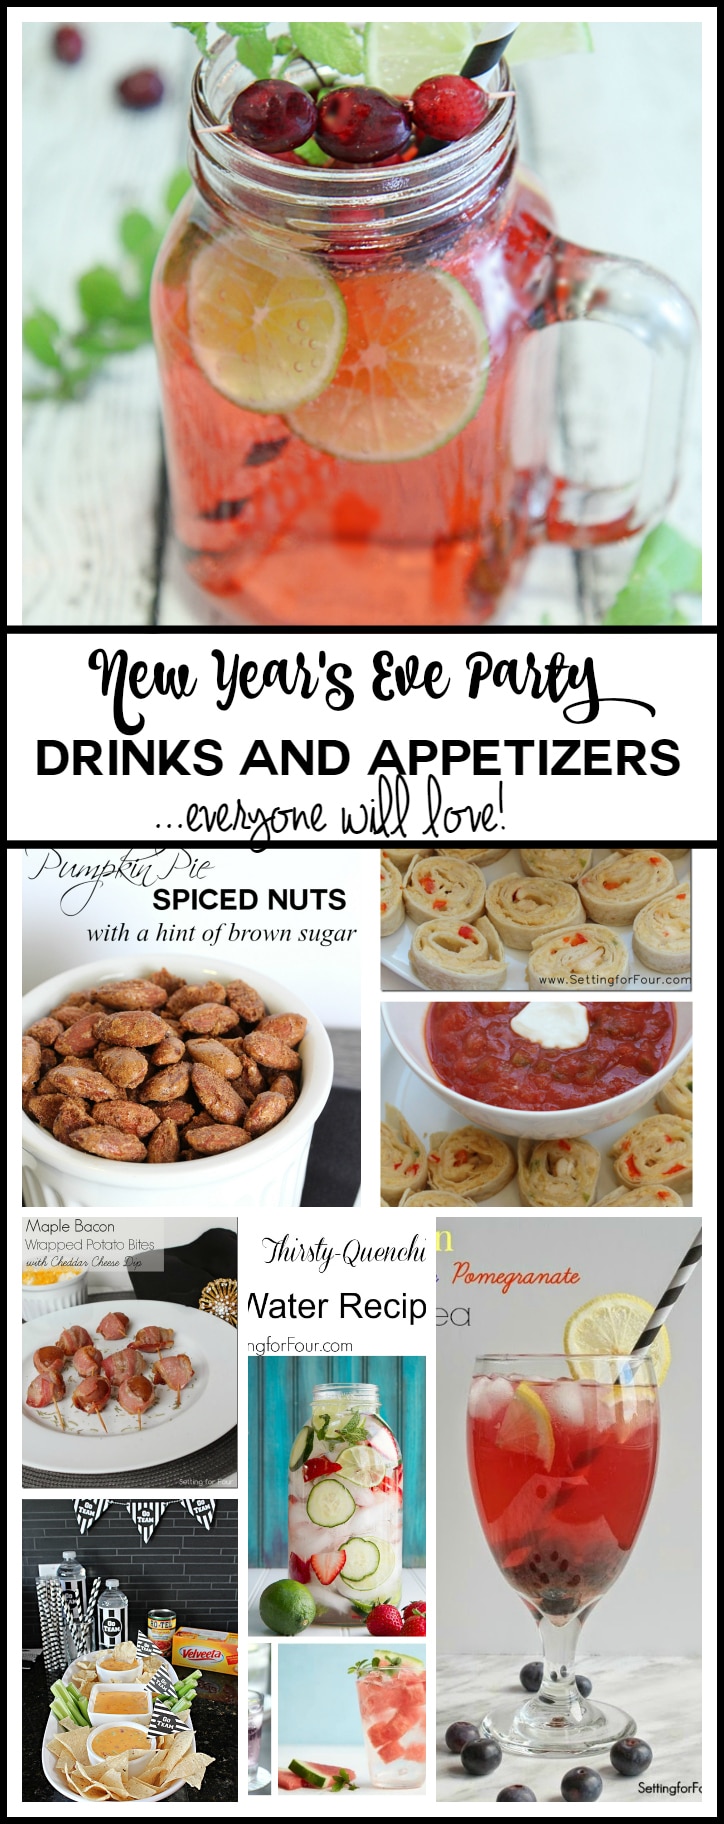 Yummy Drinks and Appetizers for New Year's Eve - recipes everyone will love! www.settingforfour.com